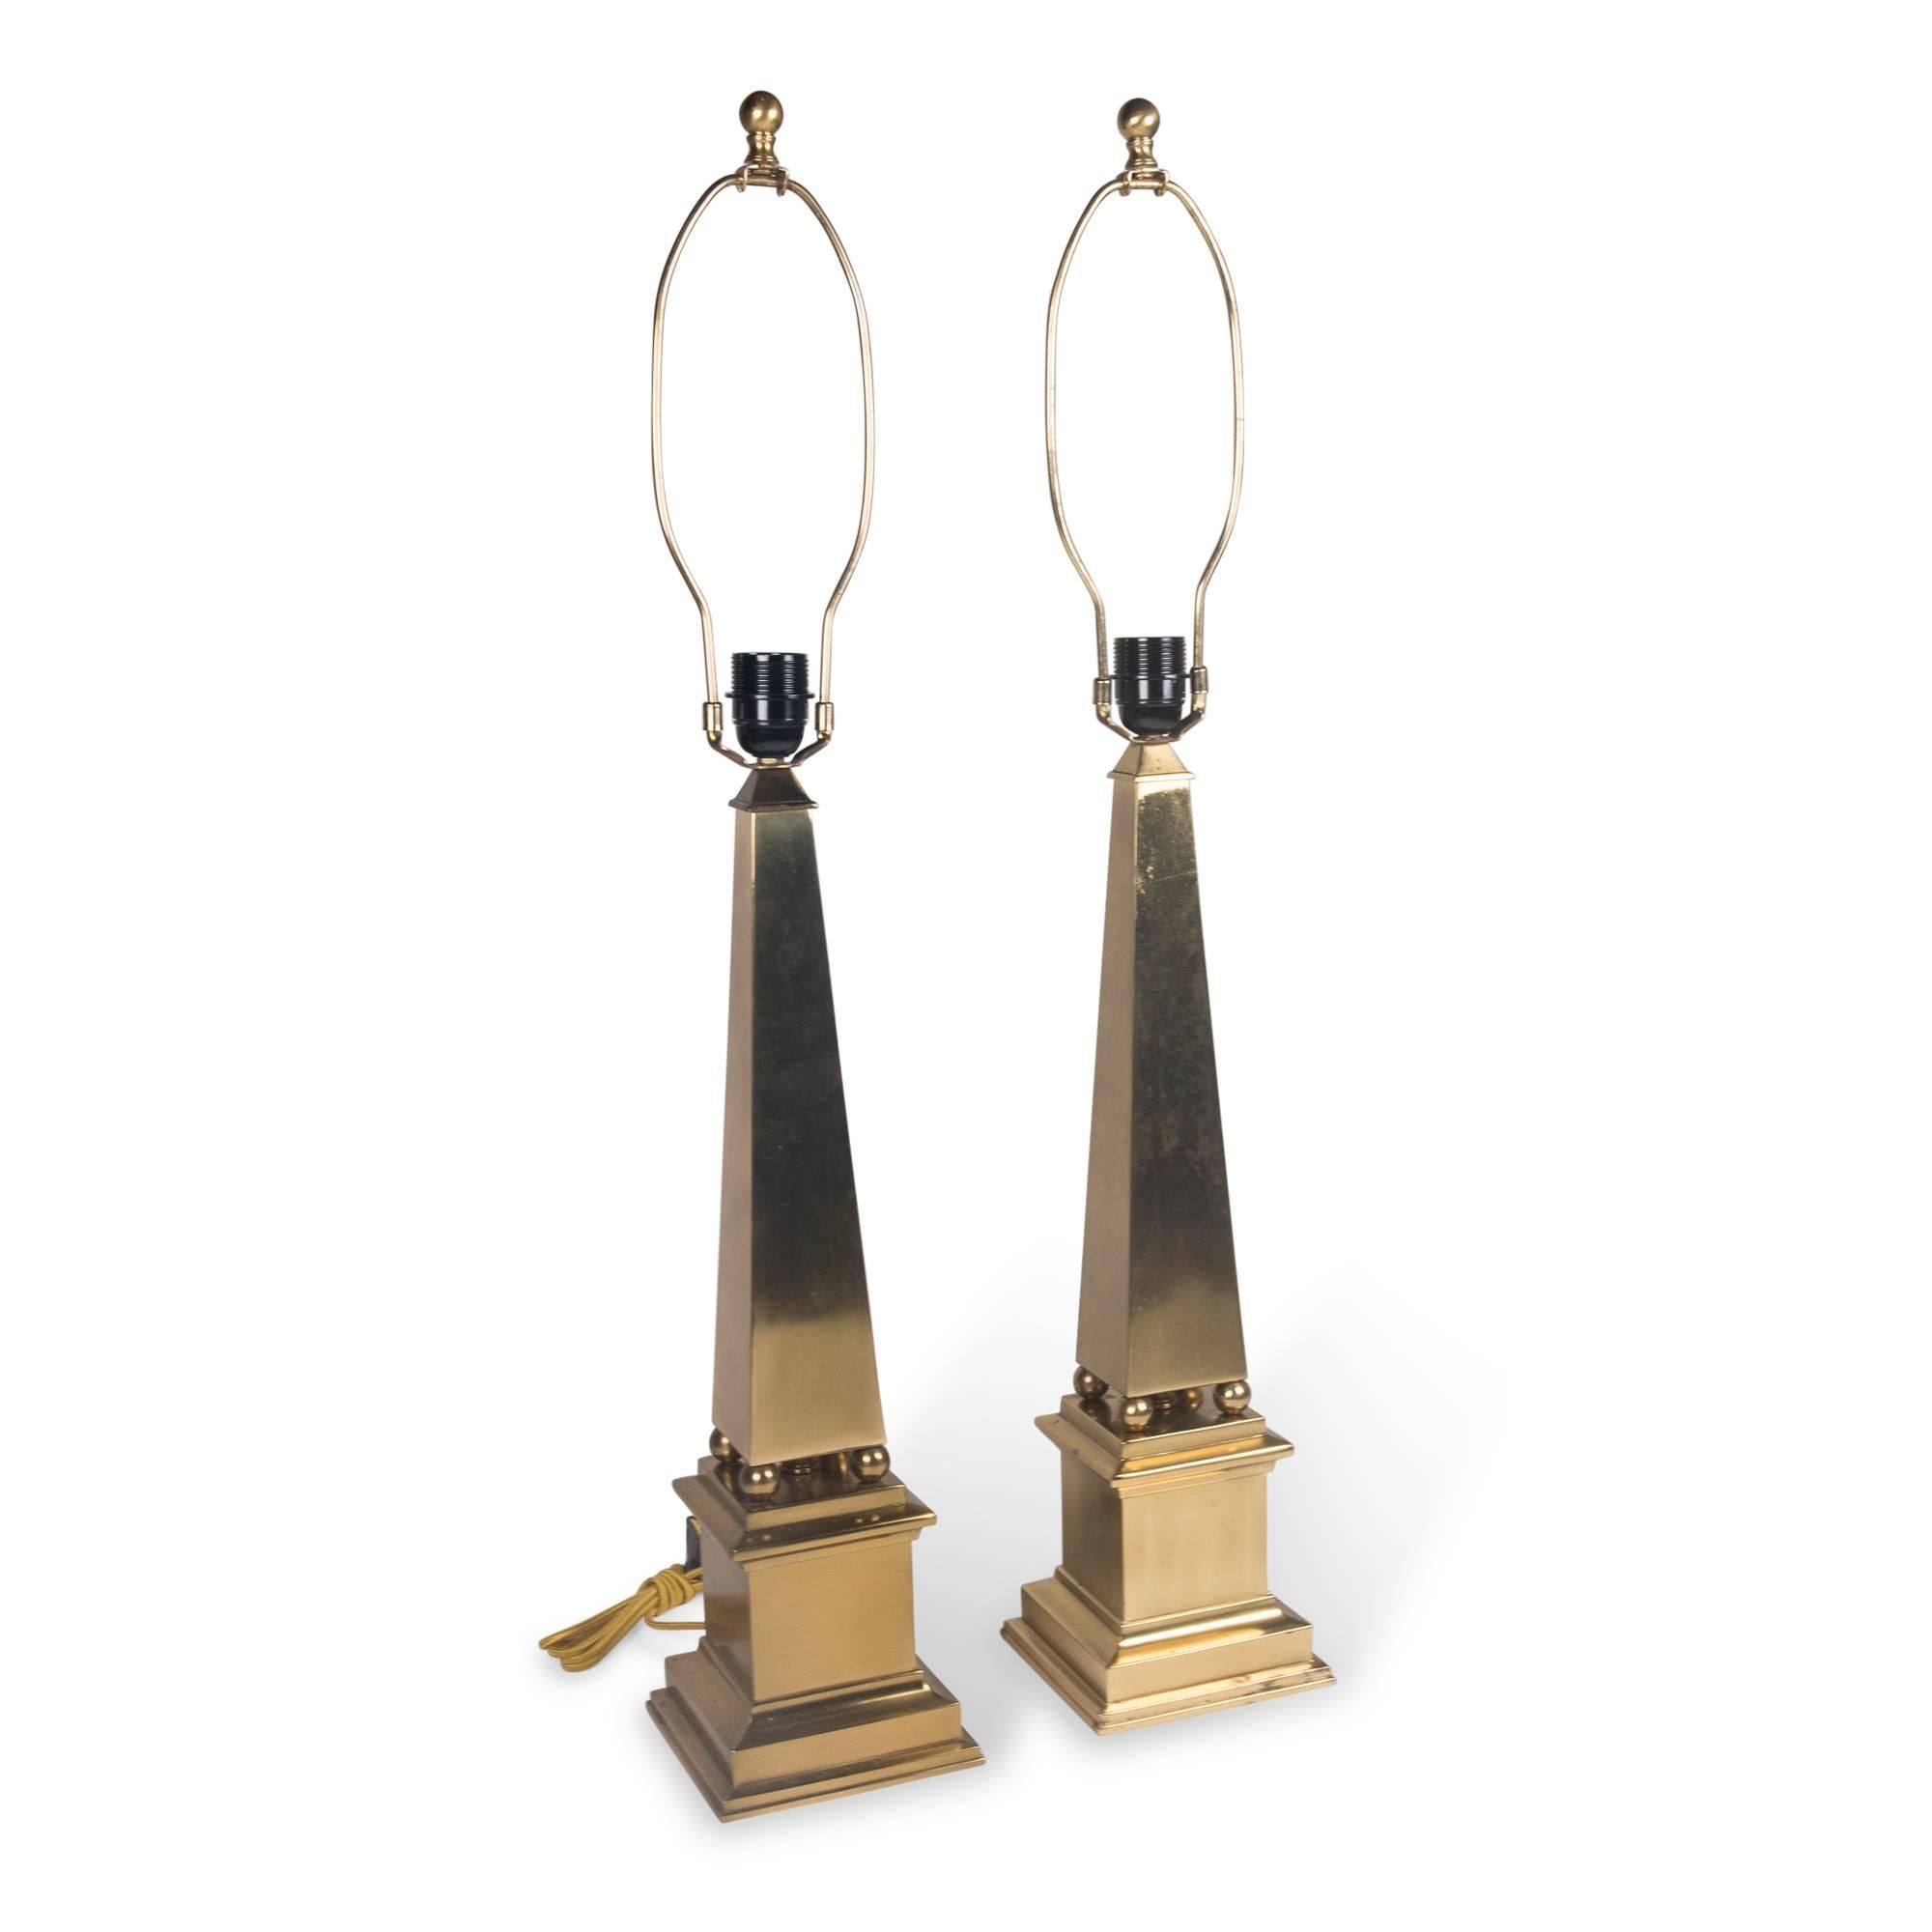 Brass obelisk form table lamps, tapered body on square base, with ball accents and finials, by Marbro, United States, early 1960s. Measures: Height to top of finial 32 in, height to top of socket 23 1/4 in. Base measures 6 in square.